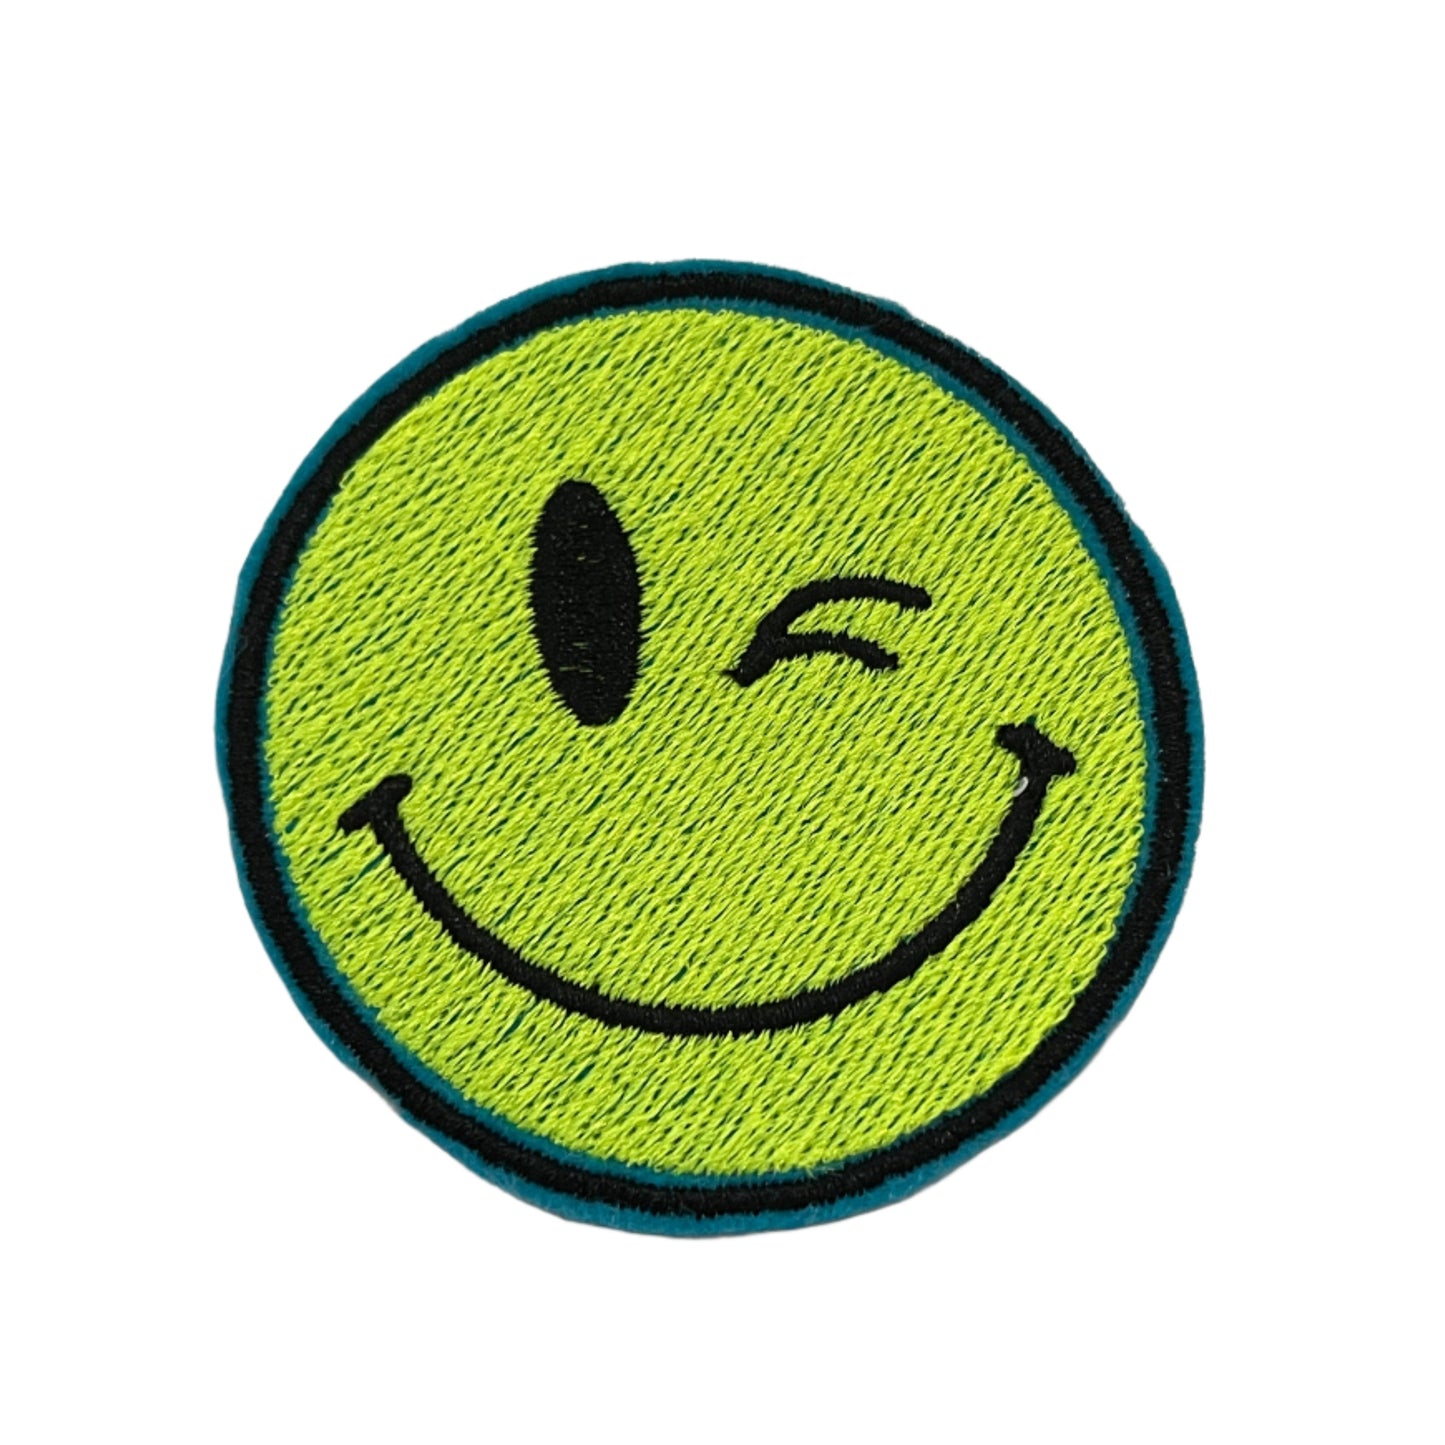 Winking Smiley Face Iron-On Patch - Retro Fun with a Modern Twist